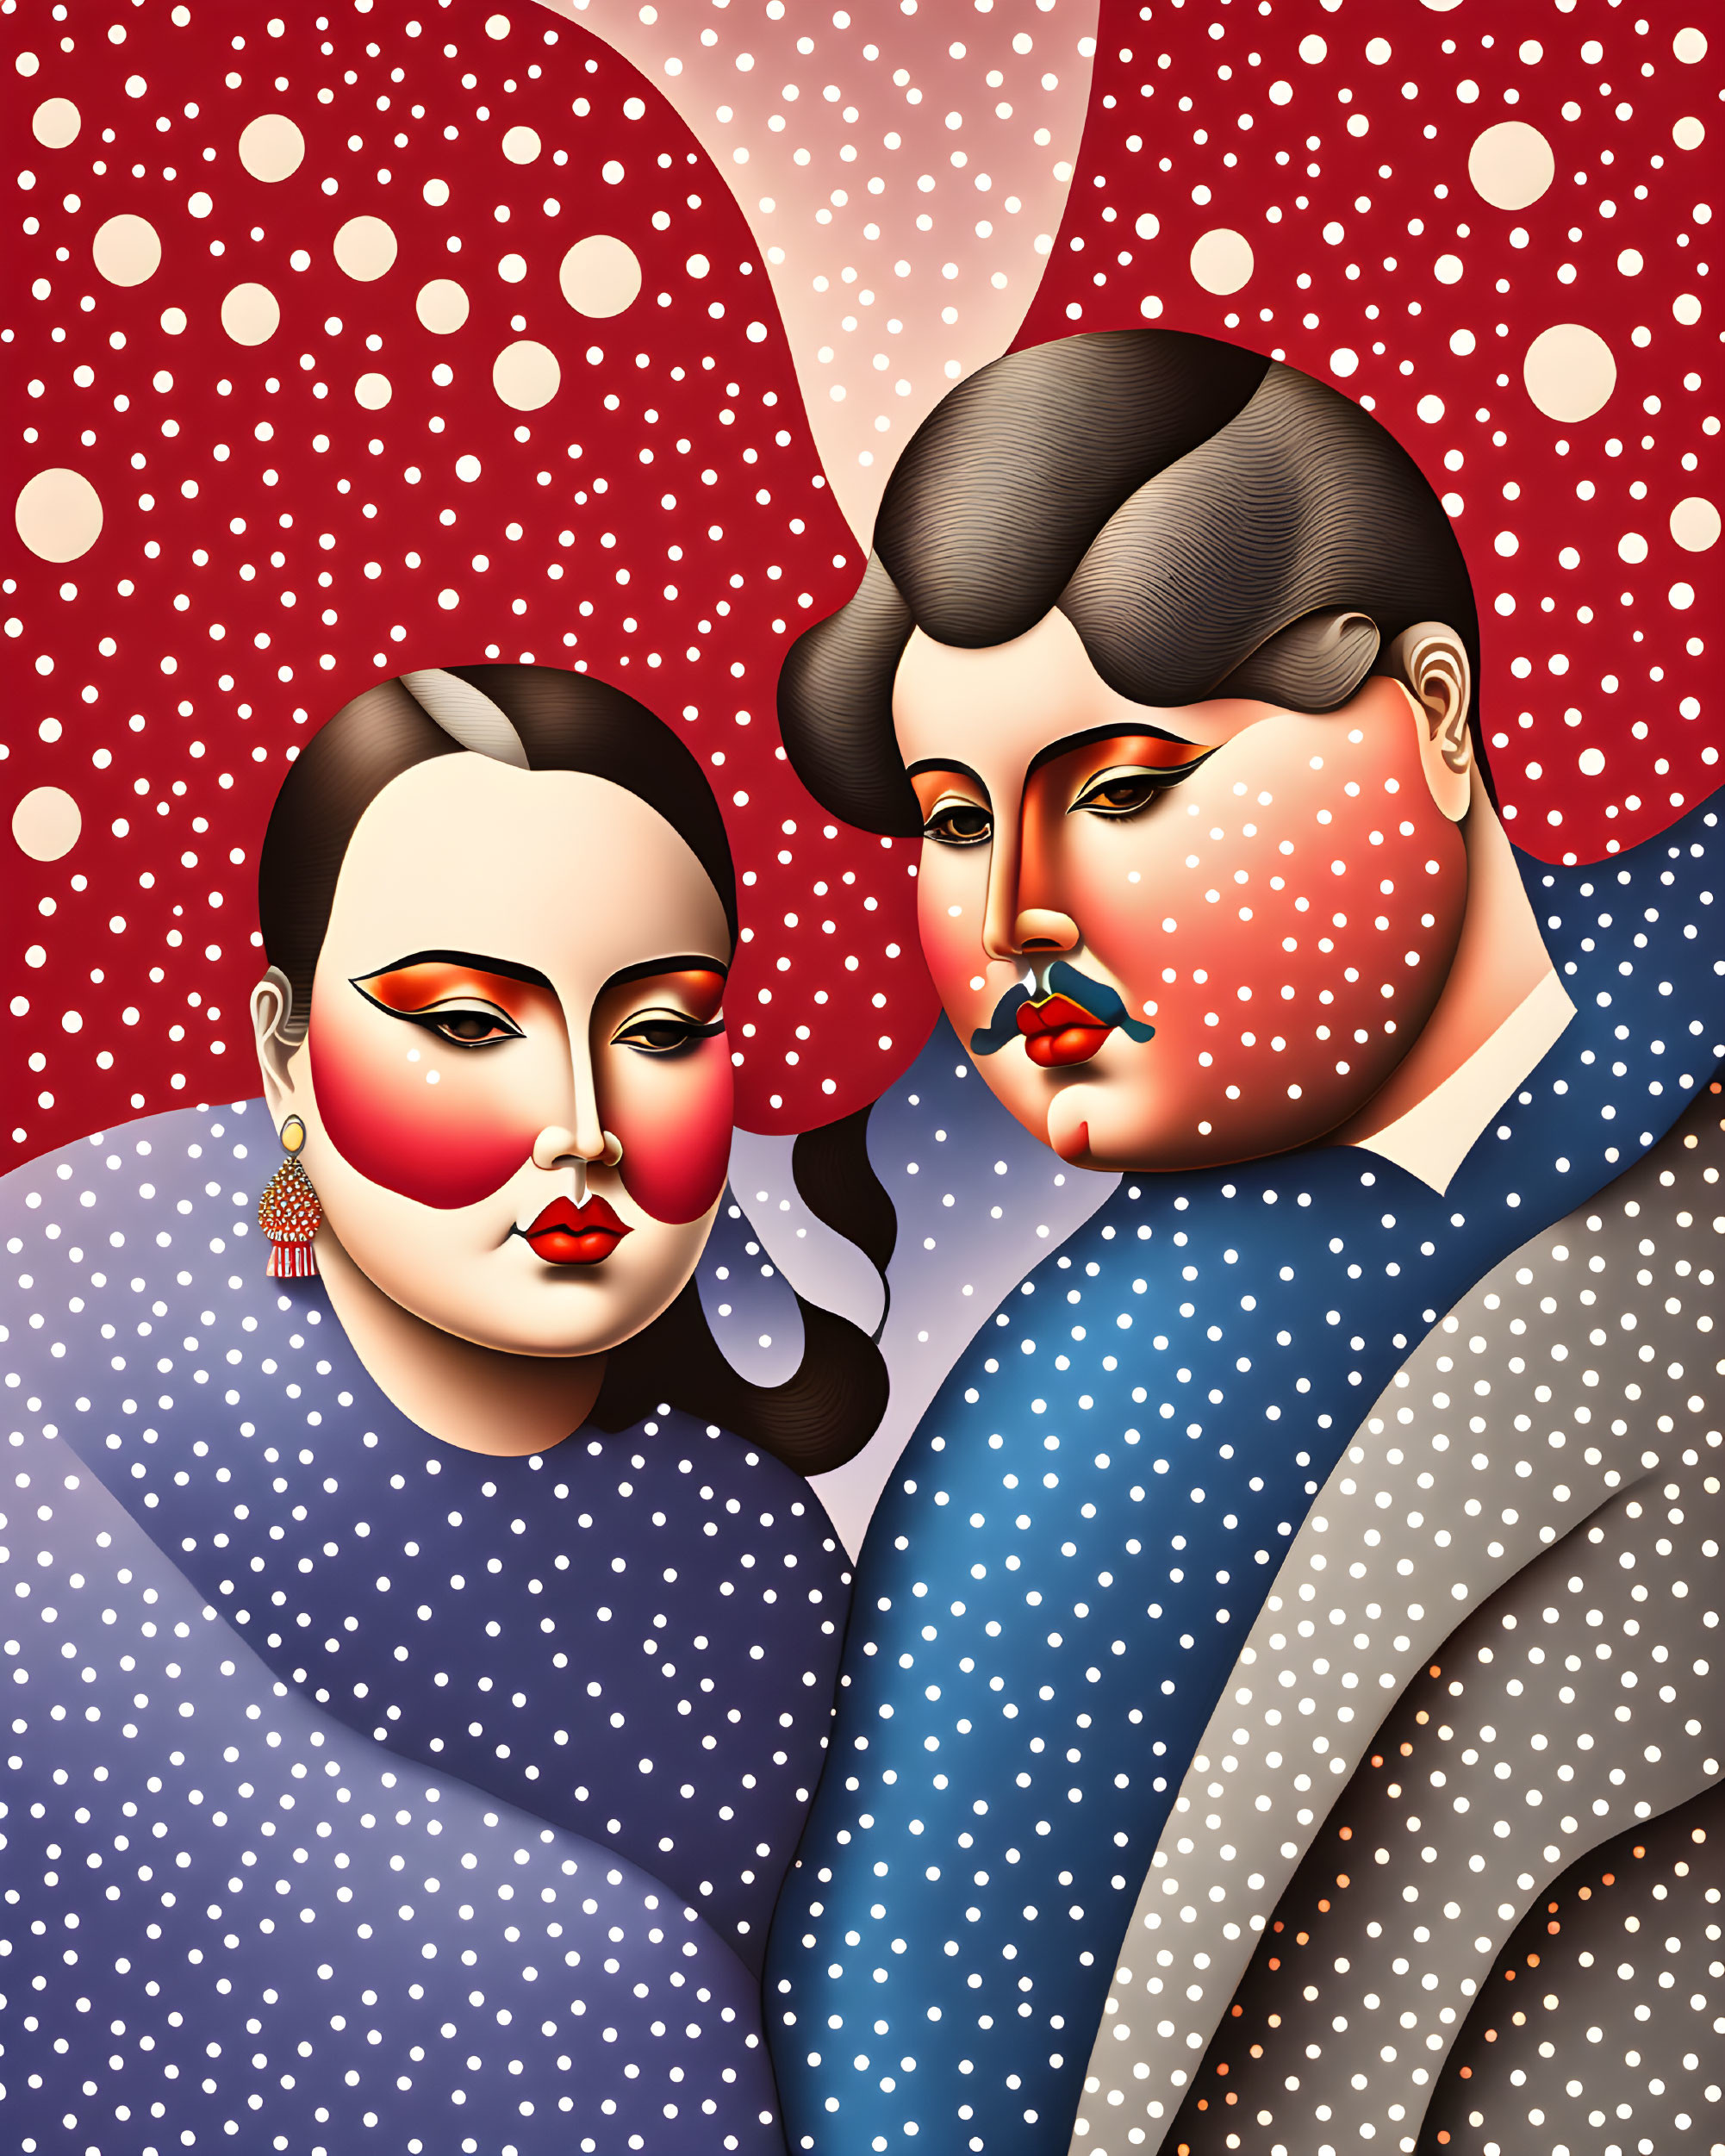 Couple in Dots